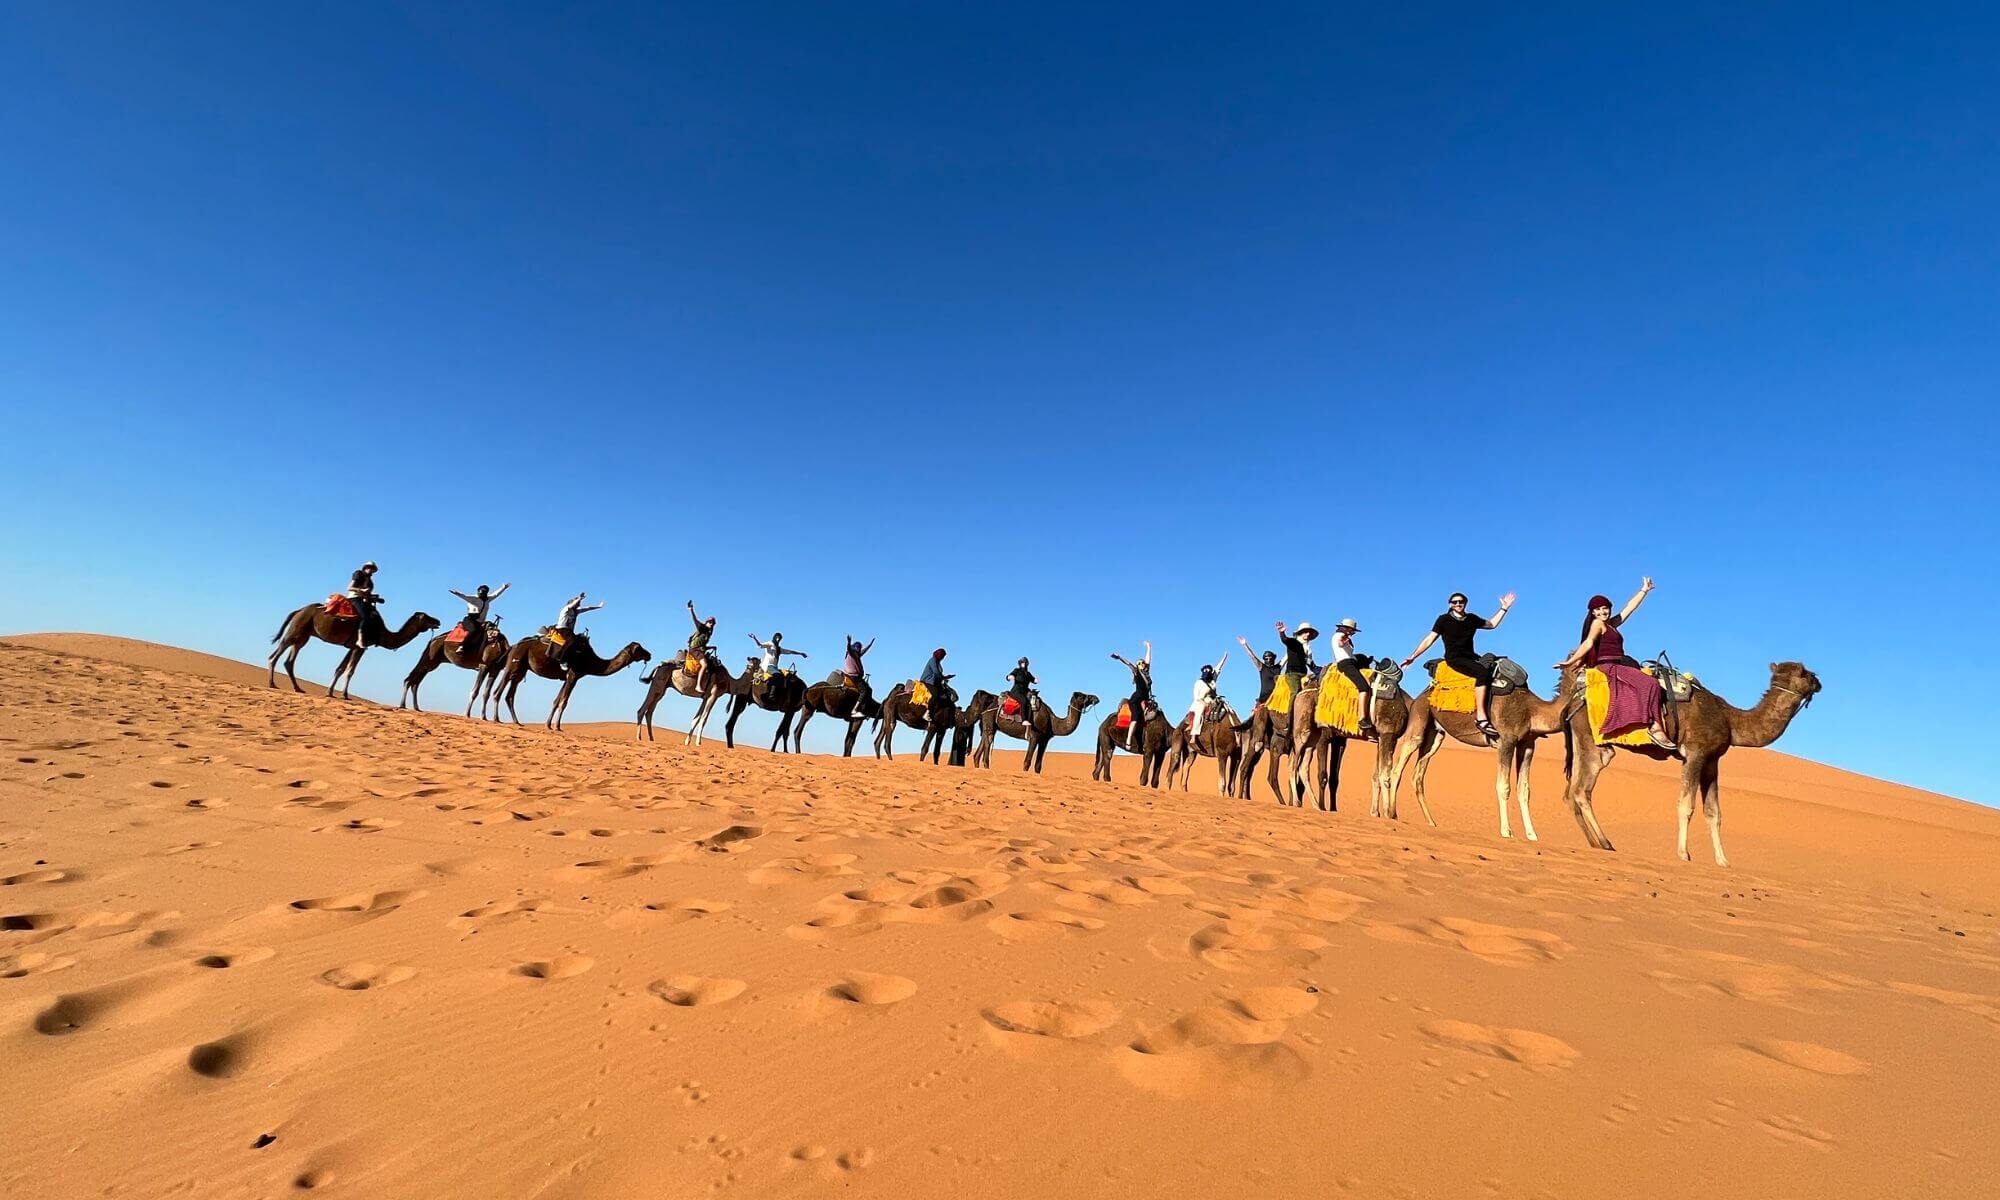 Nomadic Network tour participants on camels in Morocco